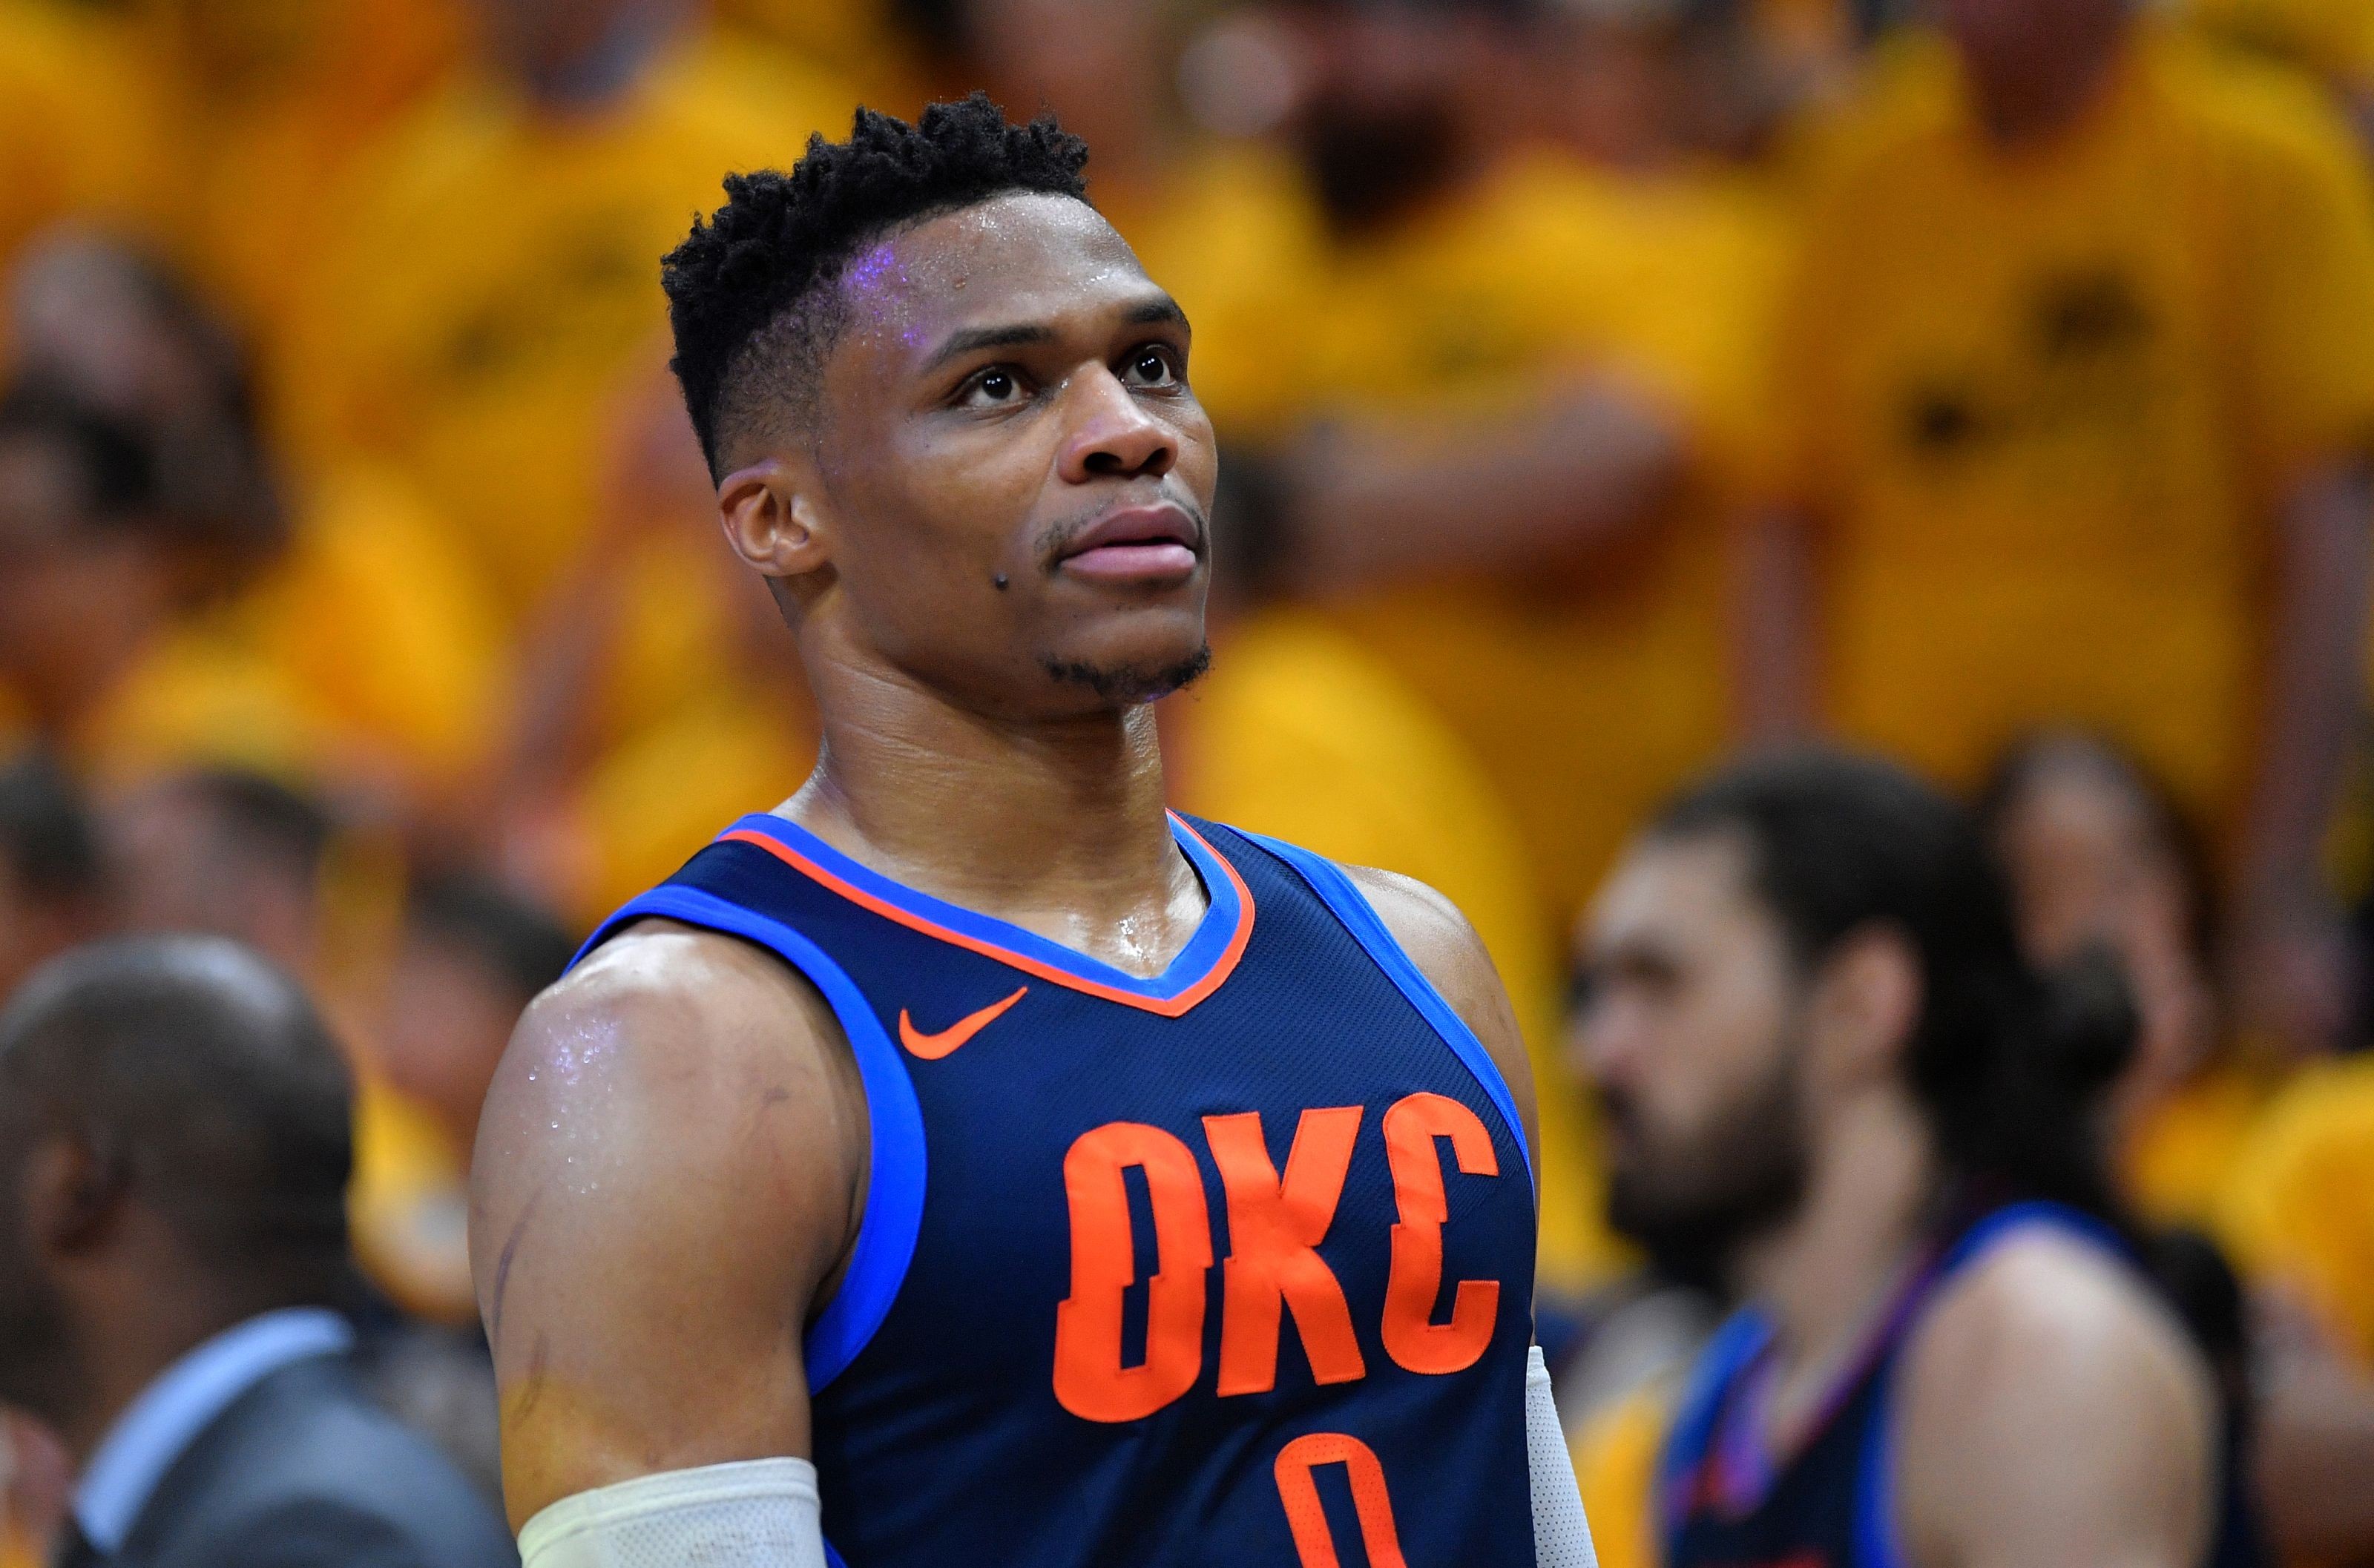 Russell Westbrook: Adding insult to elimination, NBA may issue fine.